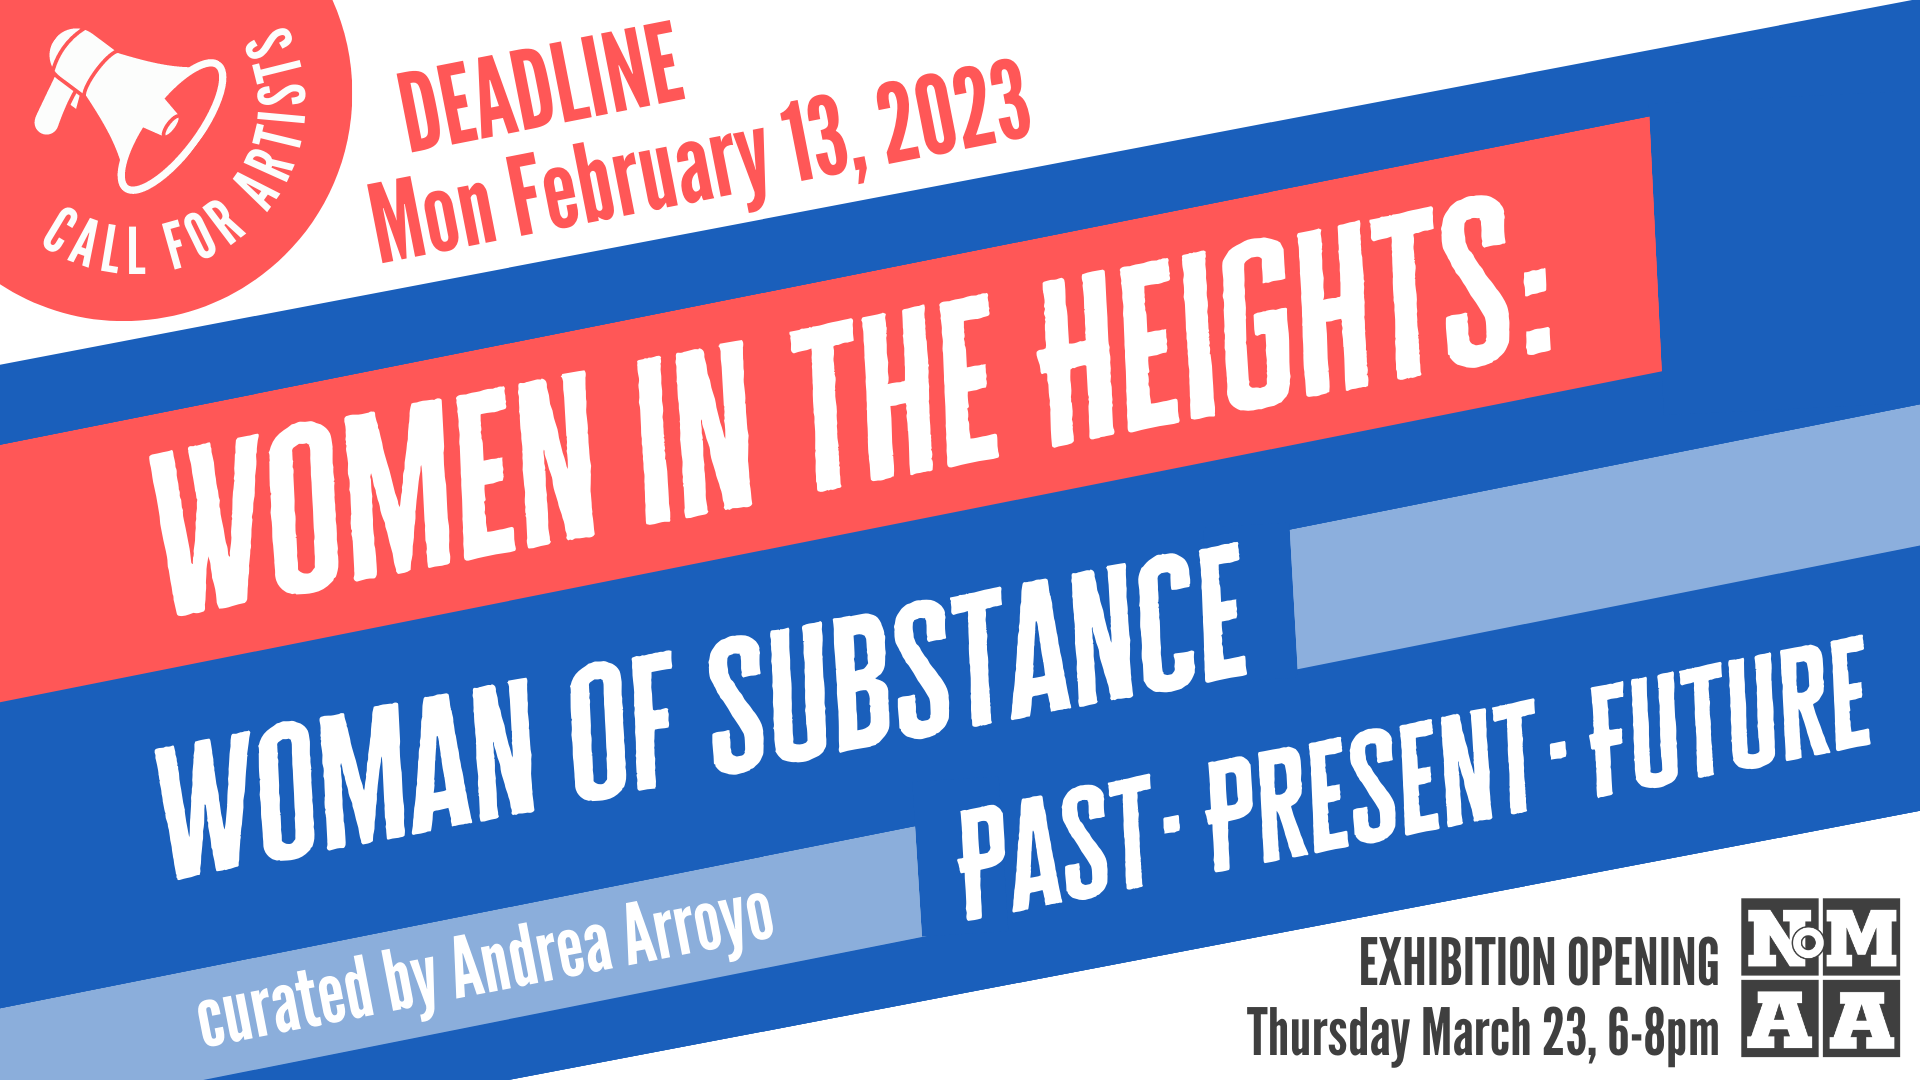 Call for Women in the Heights